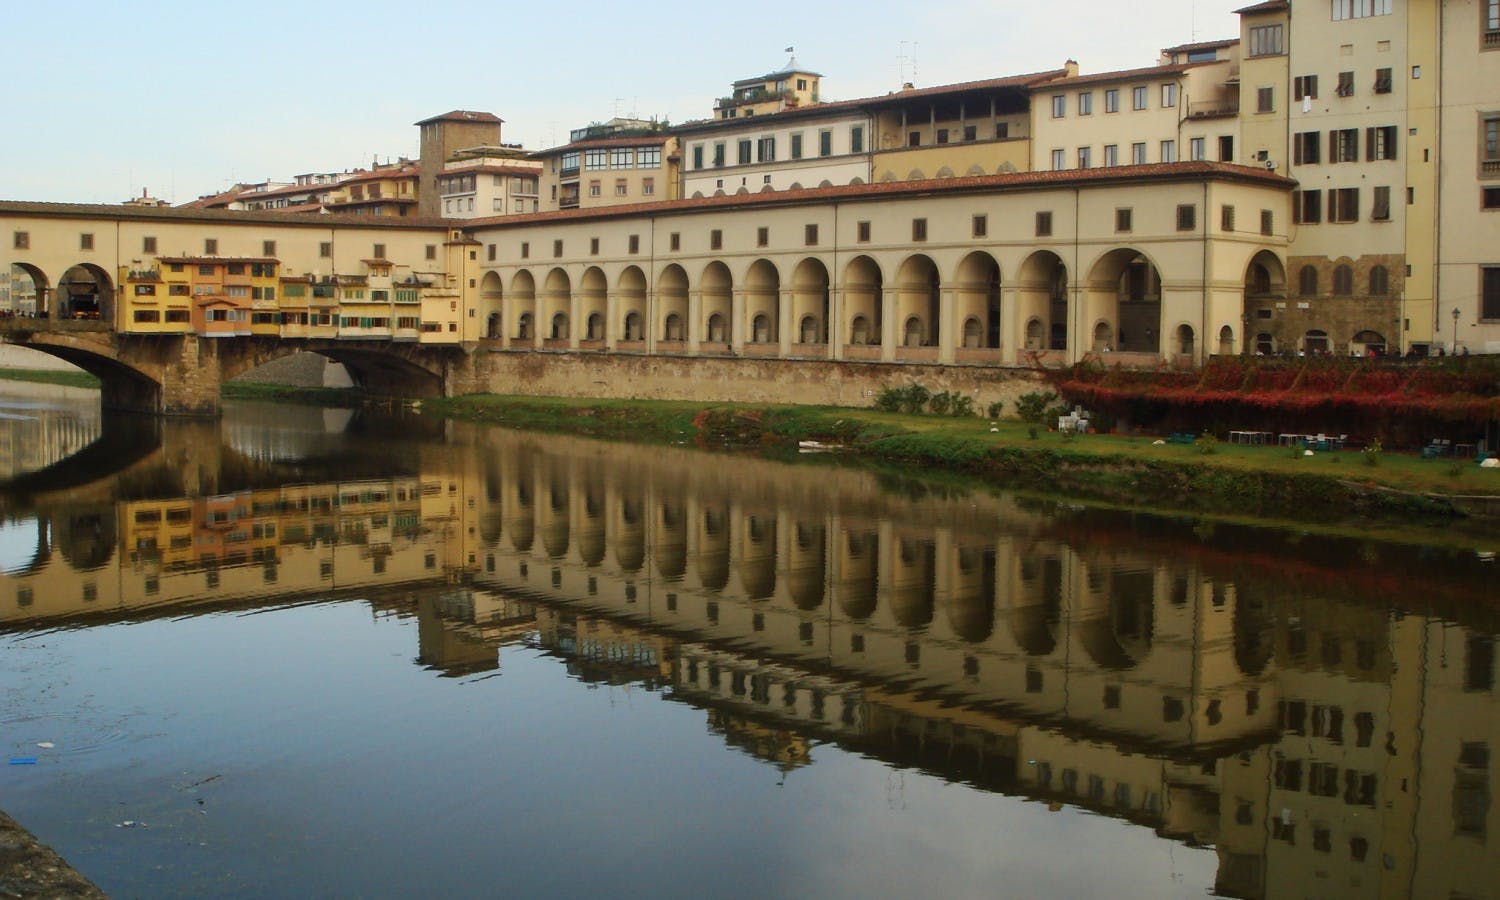 florenceday-tour-with-uffizi-and-accademia-gallery-skip-the-line-tickets-and-guided-visit_header-6504.jpeg